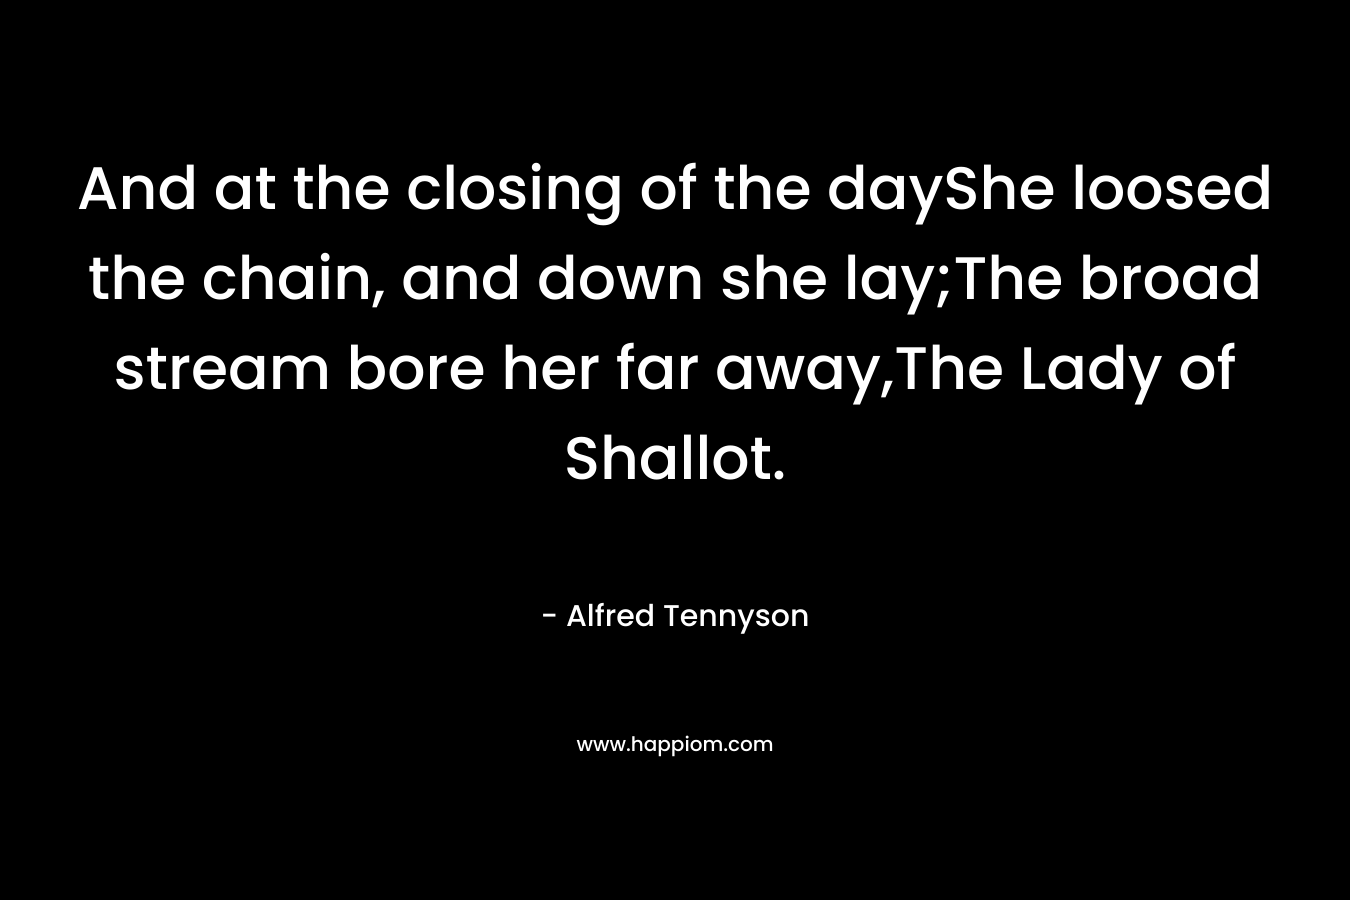 And at the closing of the dayShe loosed the chain, and down she lay;The broad stream bore her far away,The Lady of Shallot. – Alfred Tennyson